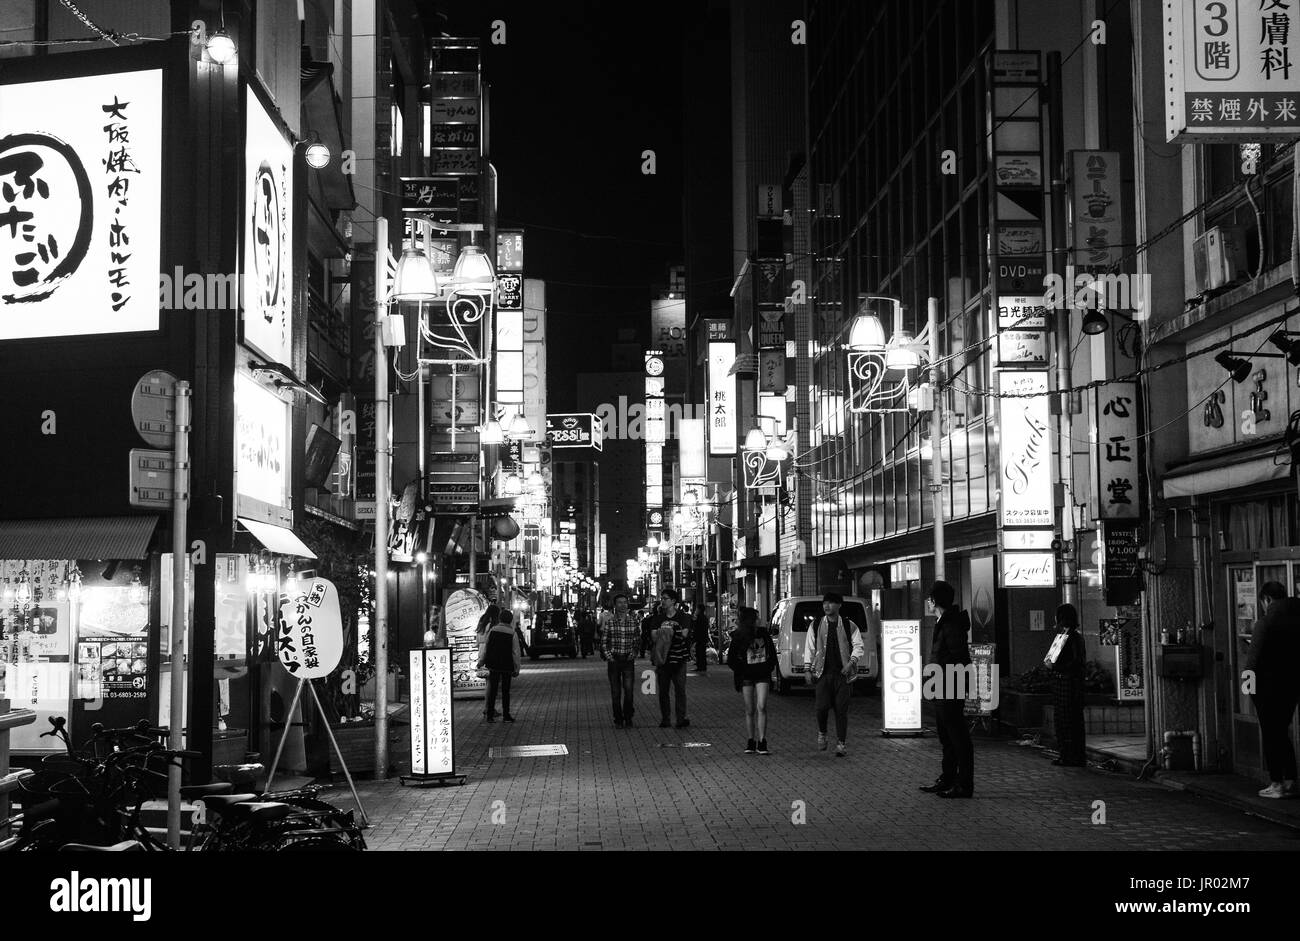 TOKYO, JAPAN - APRIL 8, 2017 - Black and white of nightlife on a busy street in Tokyo full of illuminated advertisements Stock Photo